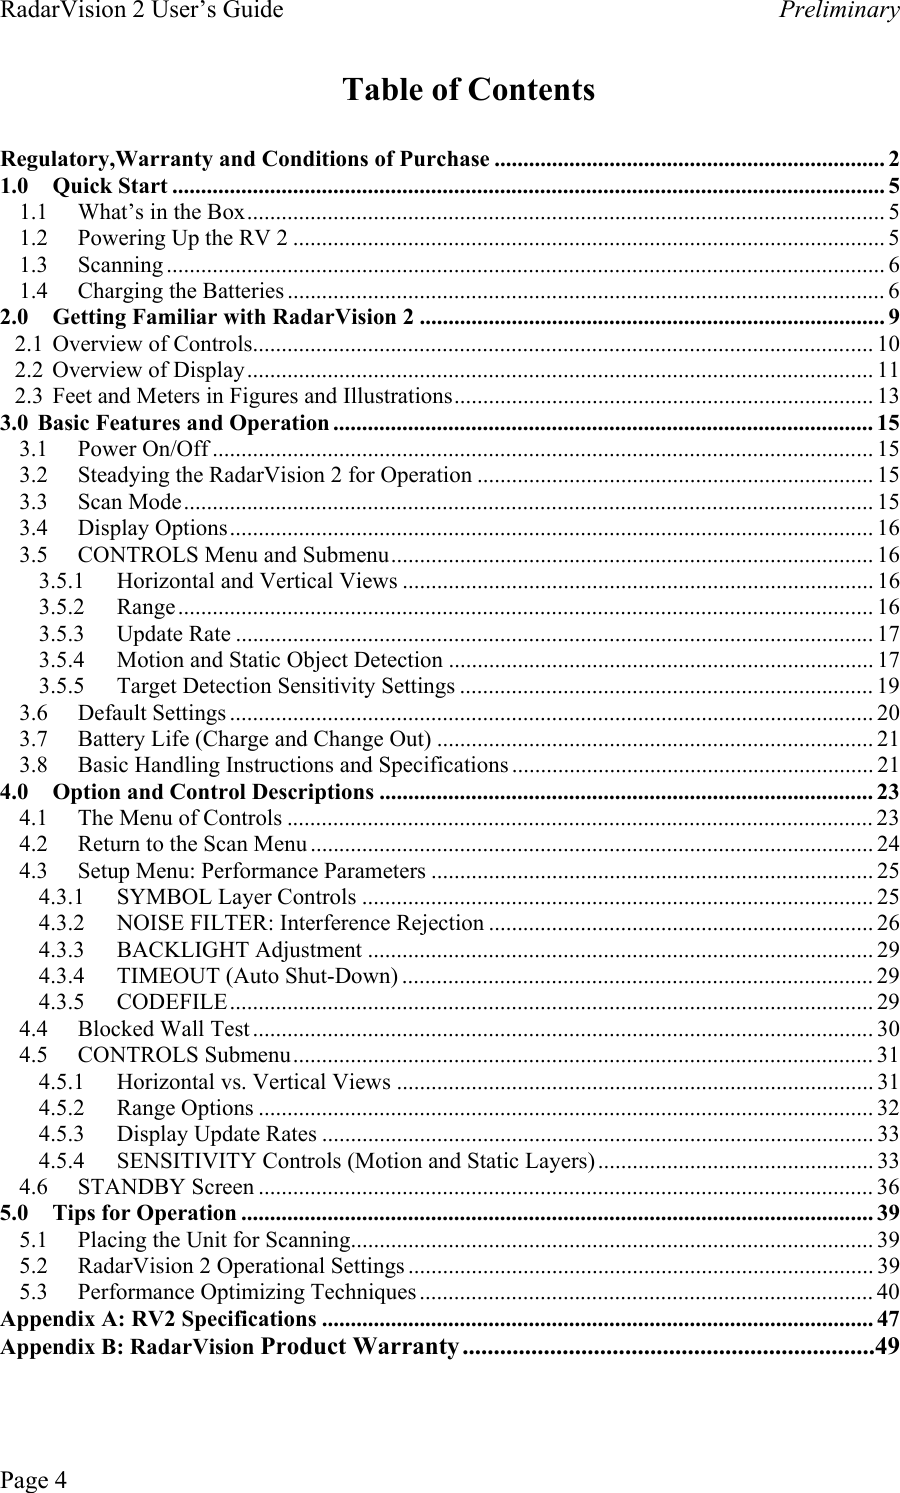 RadarVision 2 User’s Guide    Preliminary Table of Contents  Regulatory,Warranty and Conditions of Purchase .................................................................... 2 1.0 Quick Start ............................................................................................................................ 5 1.1  What’s in the Box............................................................................................................... 5 1.2  Powering Up the RV 2 ....................................................................................................... 5 1.3 Scanning ............................................................................................................................. 6 1.4 Charging the Batteries ........................................................................................................ 6 2.0  Getting Familiar with RadarVision 2 ................................................................................. 9 2.1  Overview of Controls............................................................................................................ 10 2.2 Overview of Display............................................................................................................. 11 2.3  Feet and Meters in Figures and Illustrations......................................................................... 13 3.0  Basic Features and Operation .............................................................................................. 15 3.1 Power On/Off ................................................................................................................... 15 3.2  Steadying the RadarVision 2 for Operation ..................................................................... 15 3.3 Scan Mode........................................................................................................................ 15 3.4 Display Options................................................................................................................ 16 3.5  CONTROLS Menu and Submenu.................................................................................... 16 3.5.1  Horizontal and Vertical Views .................................................................................. 16 3.5.2 Range......................................................................................................................... 16 3.5.3   Update Rate ............................................................................................................... 17 3.5.4  Motion and Static Object Detection .......................................................................... 17 3.5.5  Target Detection Sensitivity Settings ........................................................................ 19 3.6   Default Settings ................................................................................................................ 20 3.7   Battery Life (Charge and Change Out) ............................................................................ 21 3.8   Basic Handling Instructions and Specifications ............................................................... 21 4.0  Option and Control Descriptions ...................................................................................... 23 4.1  The Menu of Controls ...................................................................................................... 23 4.2  Return to the Scan Menu .................................................................................................. 24 4.3  Setup Menu: Performance Parameters ............................................................................. 25 4.3.1  SYMBOL Layer Controls ......................................................................................... 25 4.3.2  NOISE FILTER: Interference Rejection ................................................................... 26 4.3.3 BACKLIGHT Adjustment ........................................................................................ 29 4.3.4  TIMEOUT (Auto Shut-Down) .................................................................................. 29 4.3.5 CODEFILE................................................................................................................ 29 4.4 Blocked Wall Test ............................................................................................................ 30 4.5 CONTROLS Submenu..................................................................................................... 31 4.5.1  Horizontal vs. Vertical Views ................................................................................... 31 4.5.2 Range Options ........................................................................................................... 32 4.5.3  Display Update Rates ................................................................................................ 33 4.5.4  SENSITIVITY Controls (Motion and Static Layers) ................................................ 33 4.6 STANDBY Screen ........................................................................................................... 36 5.0 Tips for Operation .............................................................................................................. 39 5.1  Placing the Unit for Scanning........................................................................................... 39 5.2  RadarVision 2 Operational Settings ................................................................................. 39 5.3  Performance Optimizing Techniques............................................................................... 40 Appendix A: RV2 Specifications ................................................................................................ 47 Appendix B: RadarVision Product Warranty..................................................................49 Page 4 